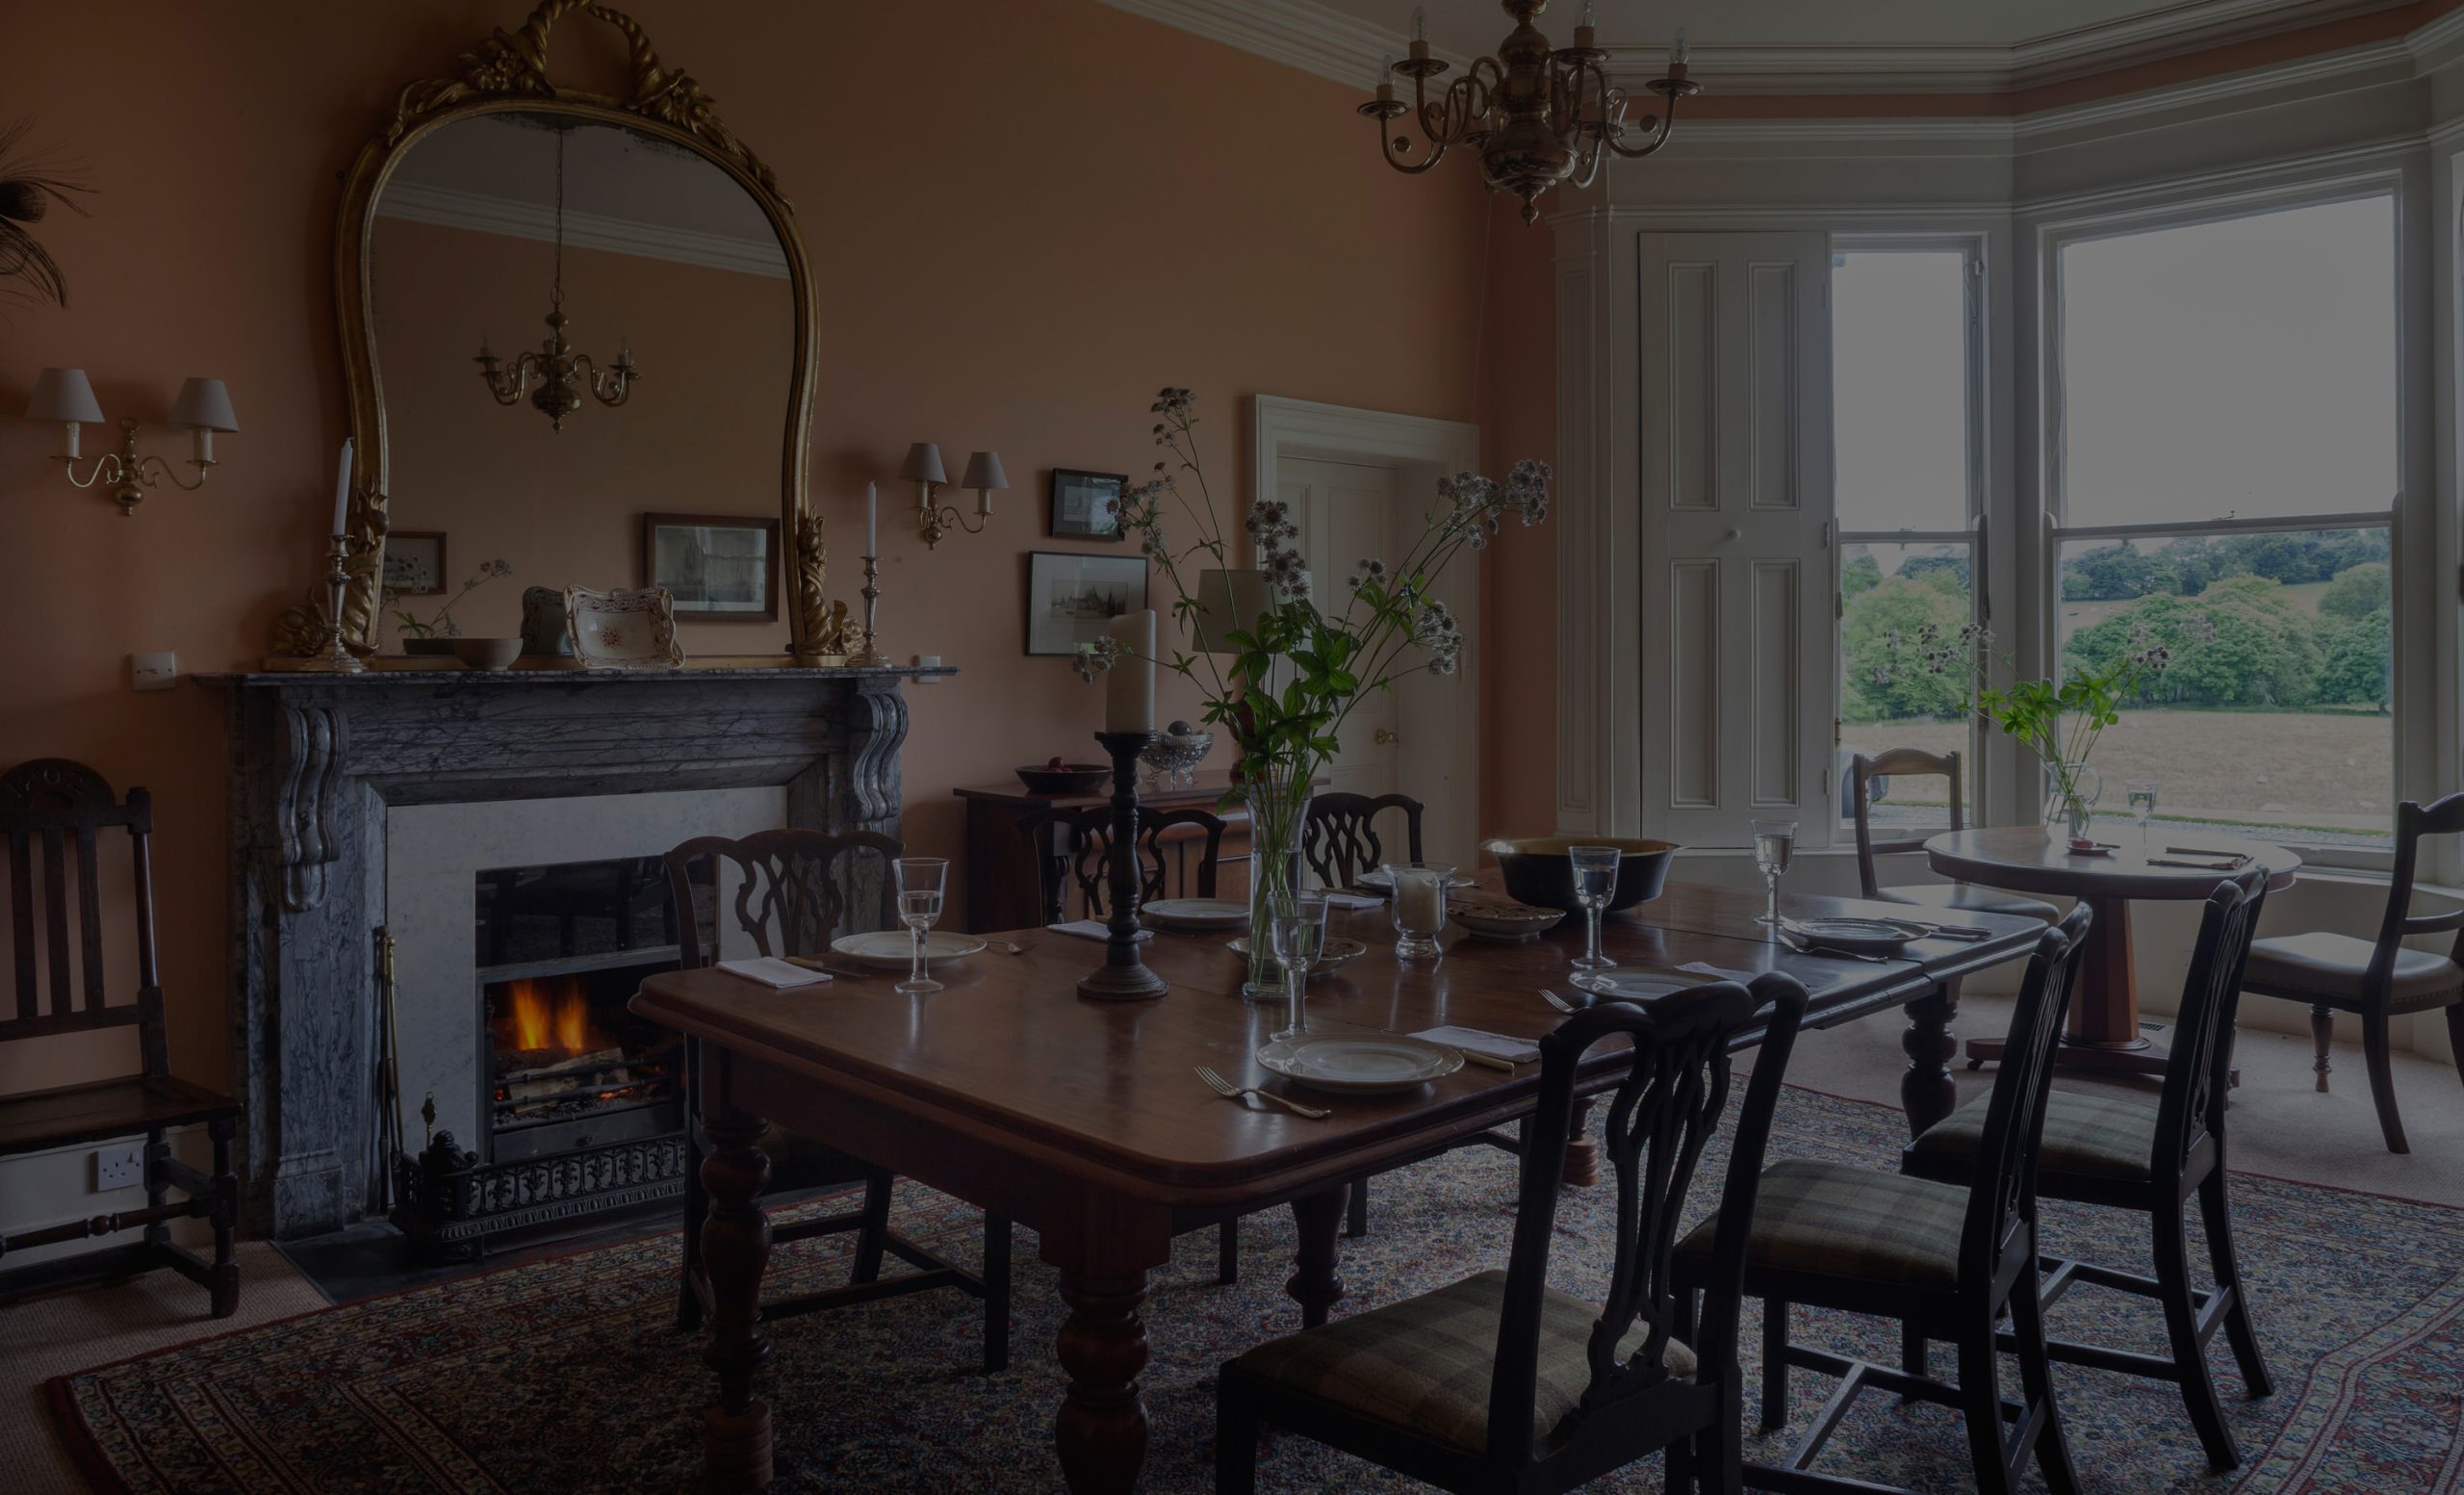 Lough Bawn House Country House accommodation bed and breakfast westmeath ireland